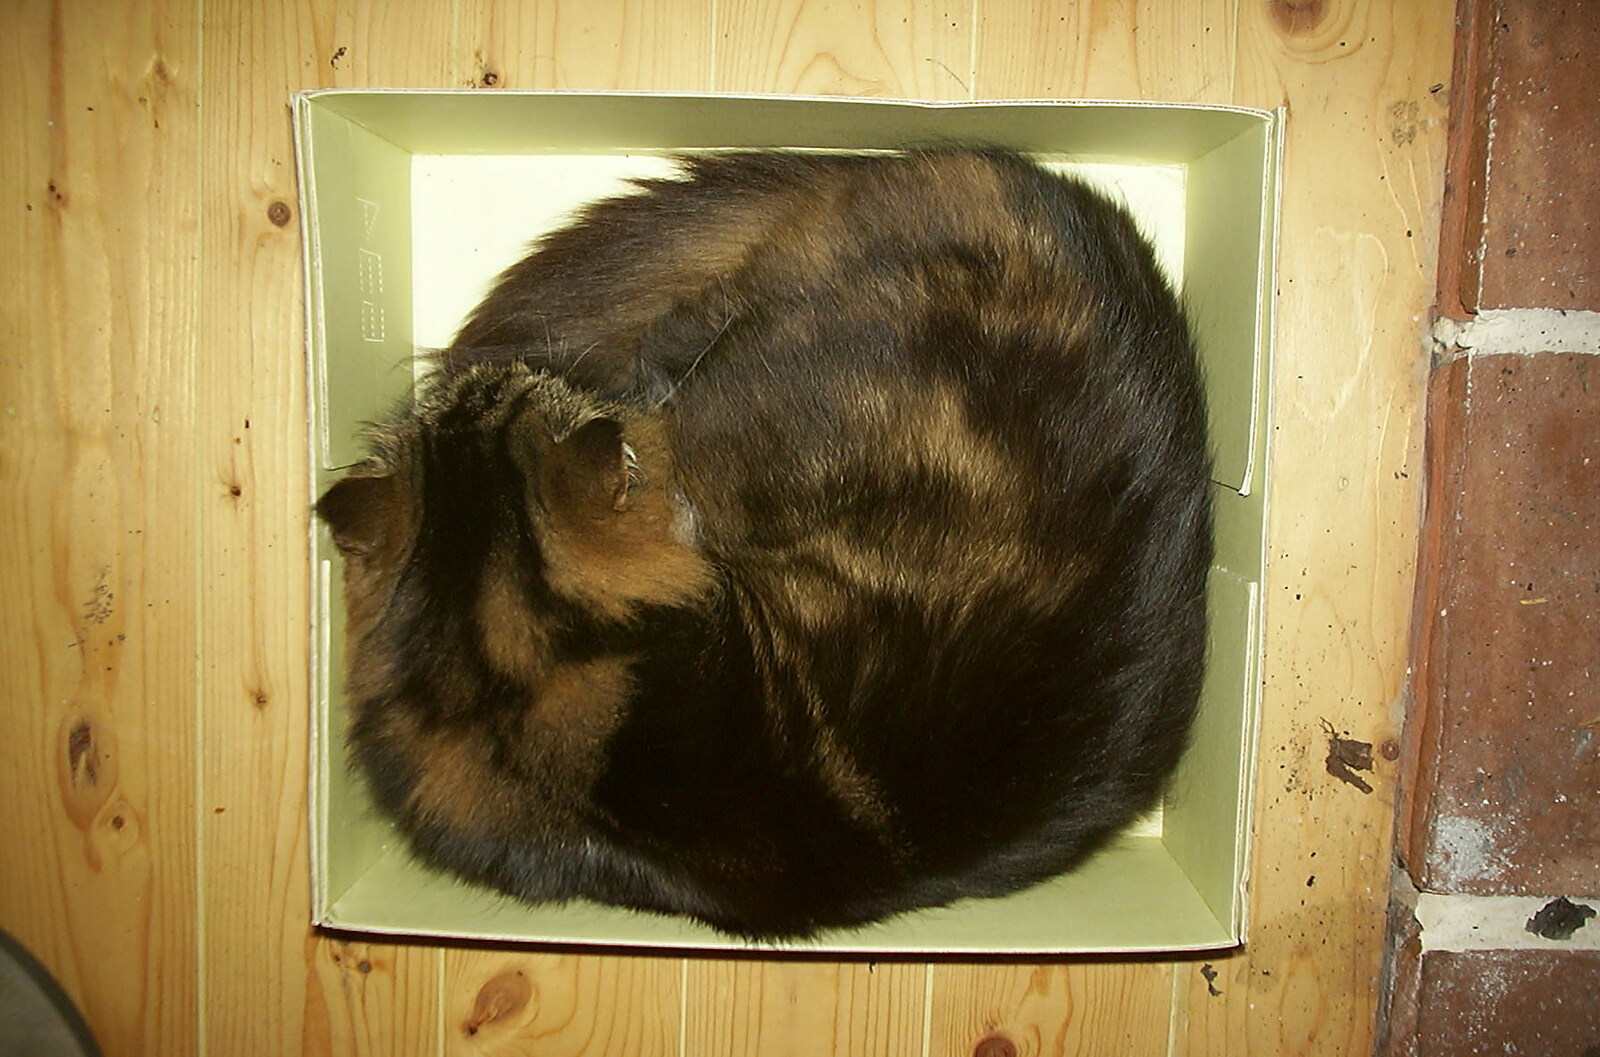 Sophie does Cat in a Box from Mother and Mike Visit, and Cat Photos, Brome, Suffolk - 1st September 2002